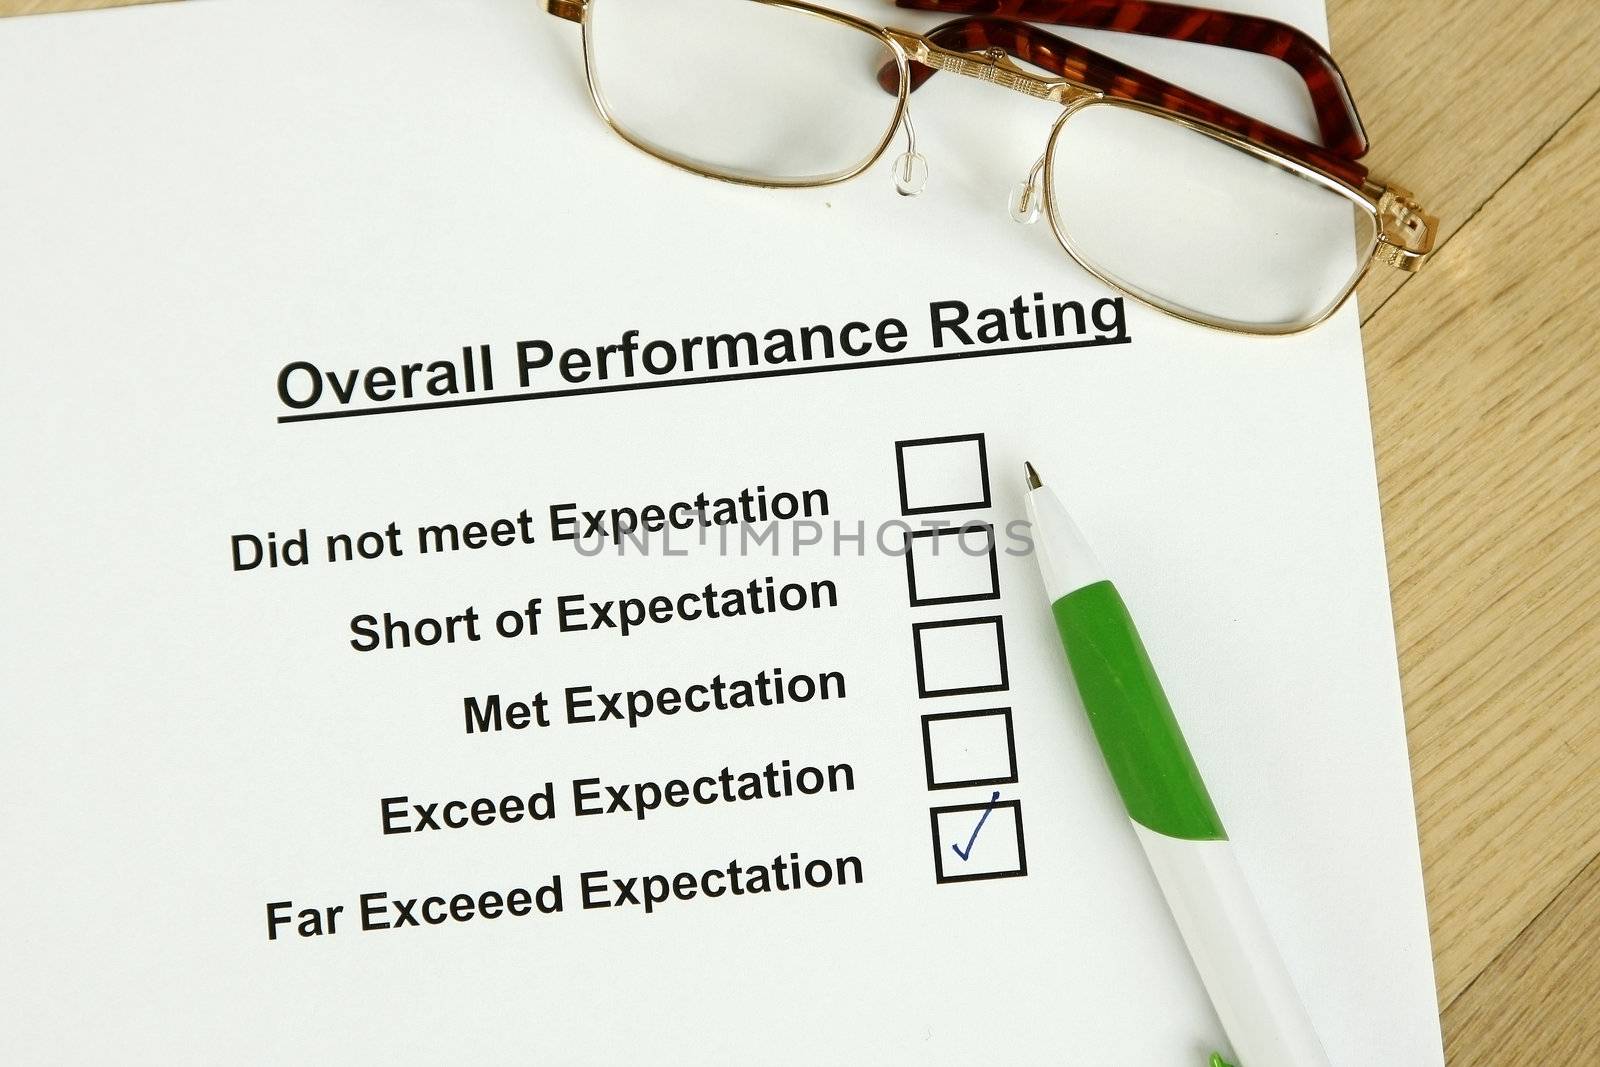 This is an image of an employee performance evaluation and a pair of glasses.